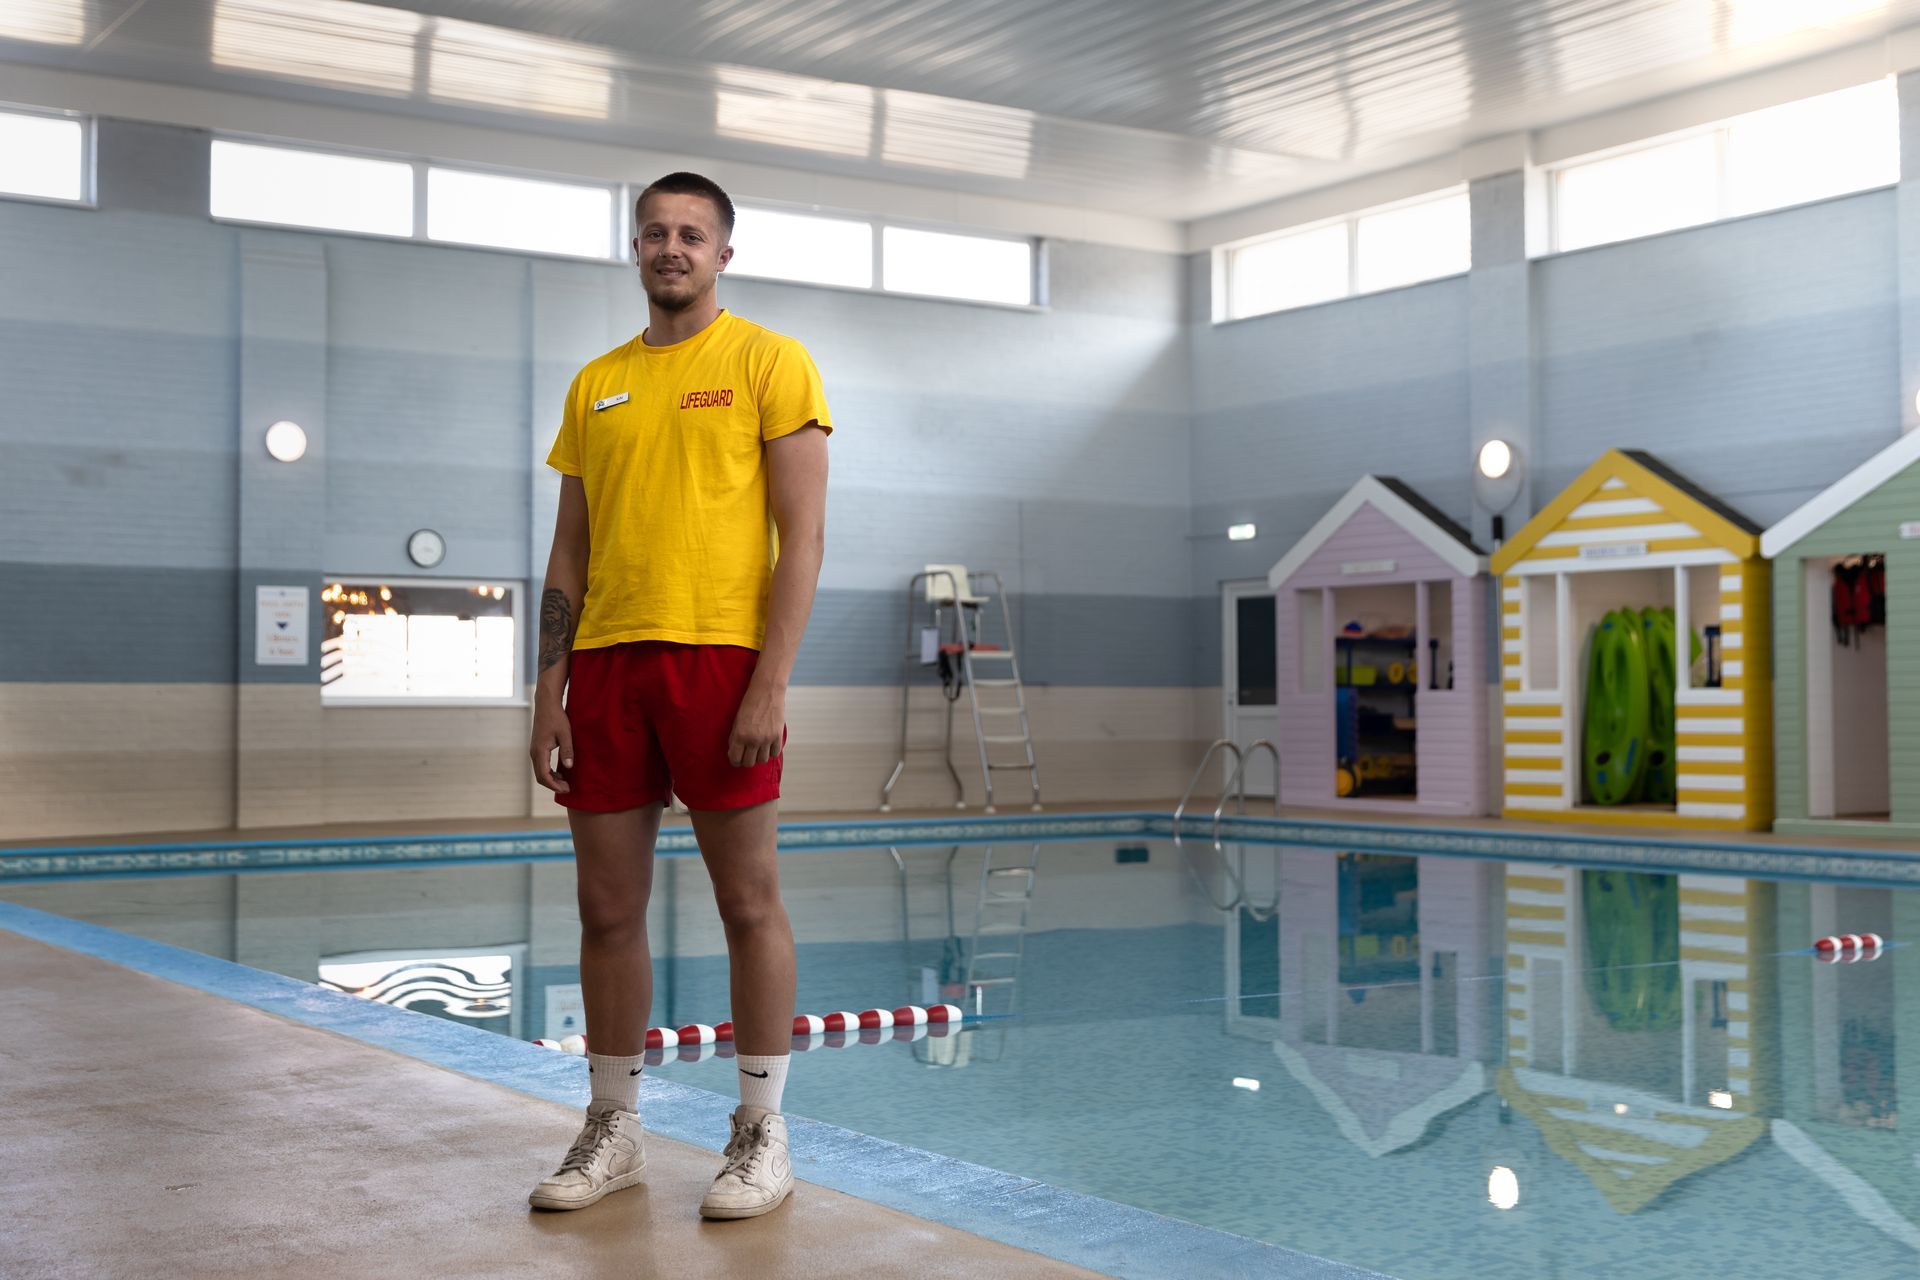 A man in a yellow shirt and red shorts is standing in front of a swimming pool.